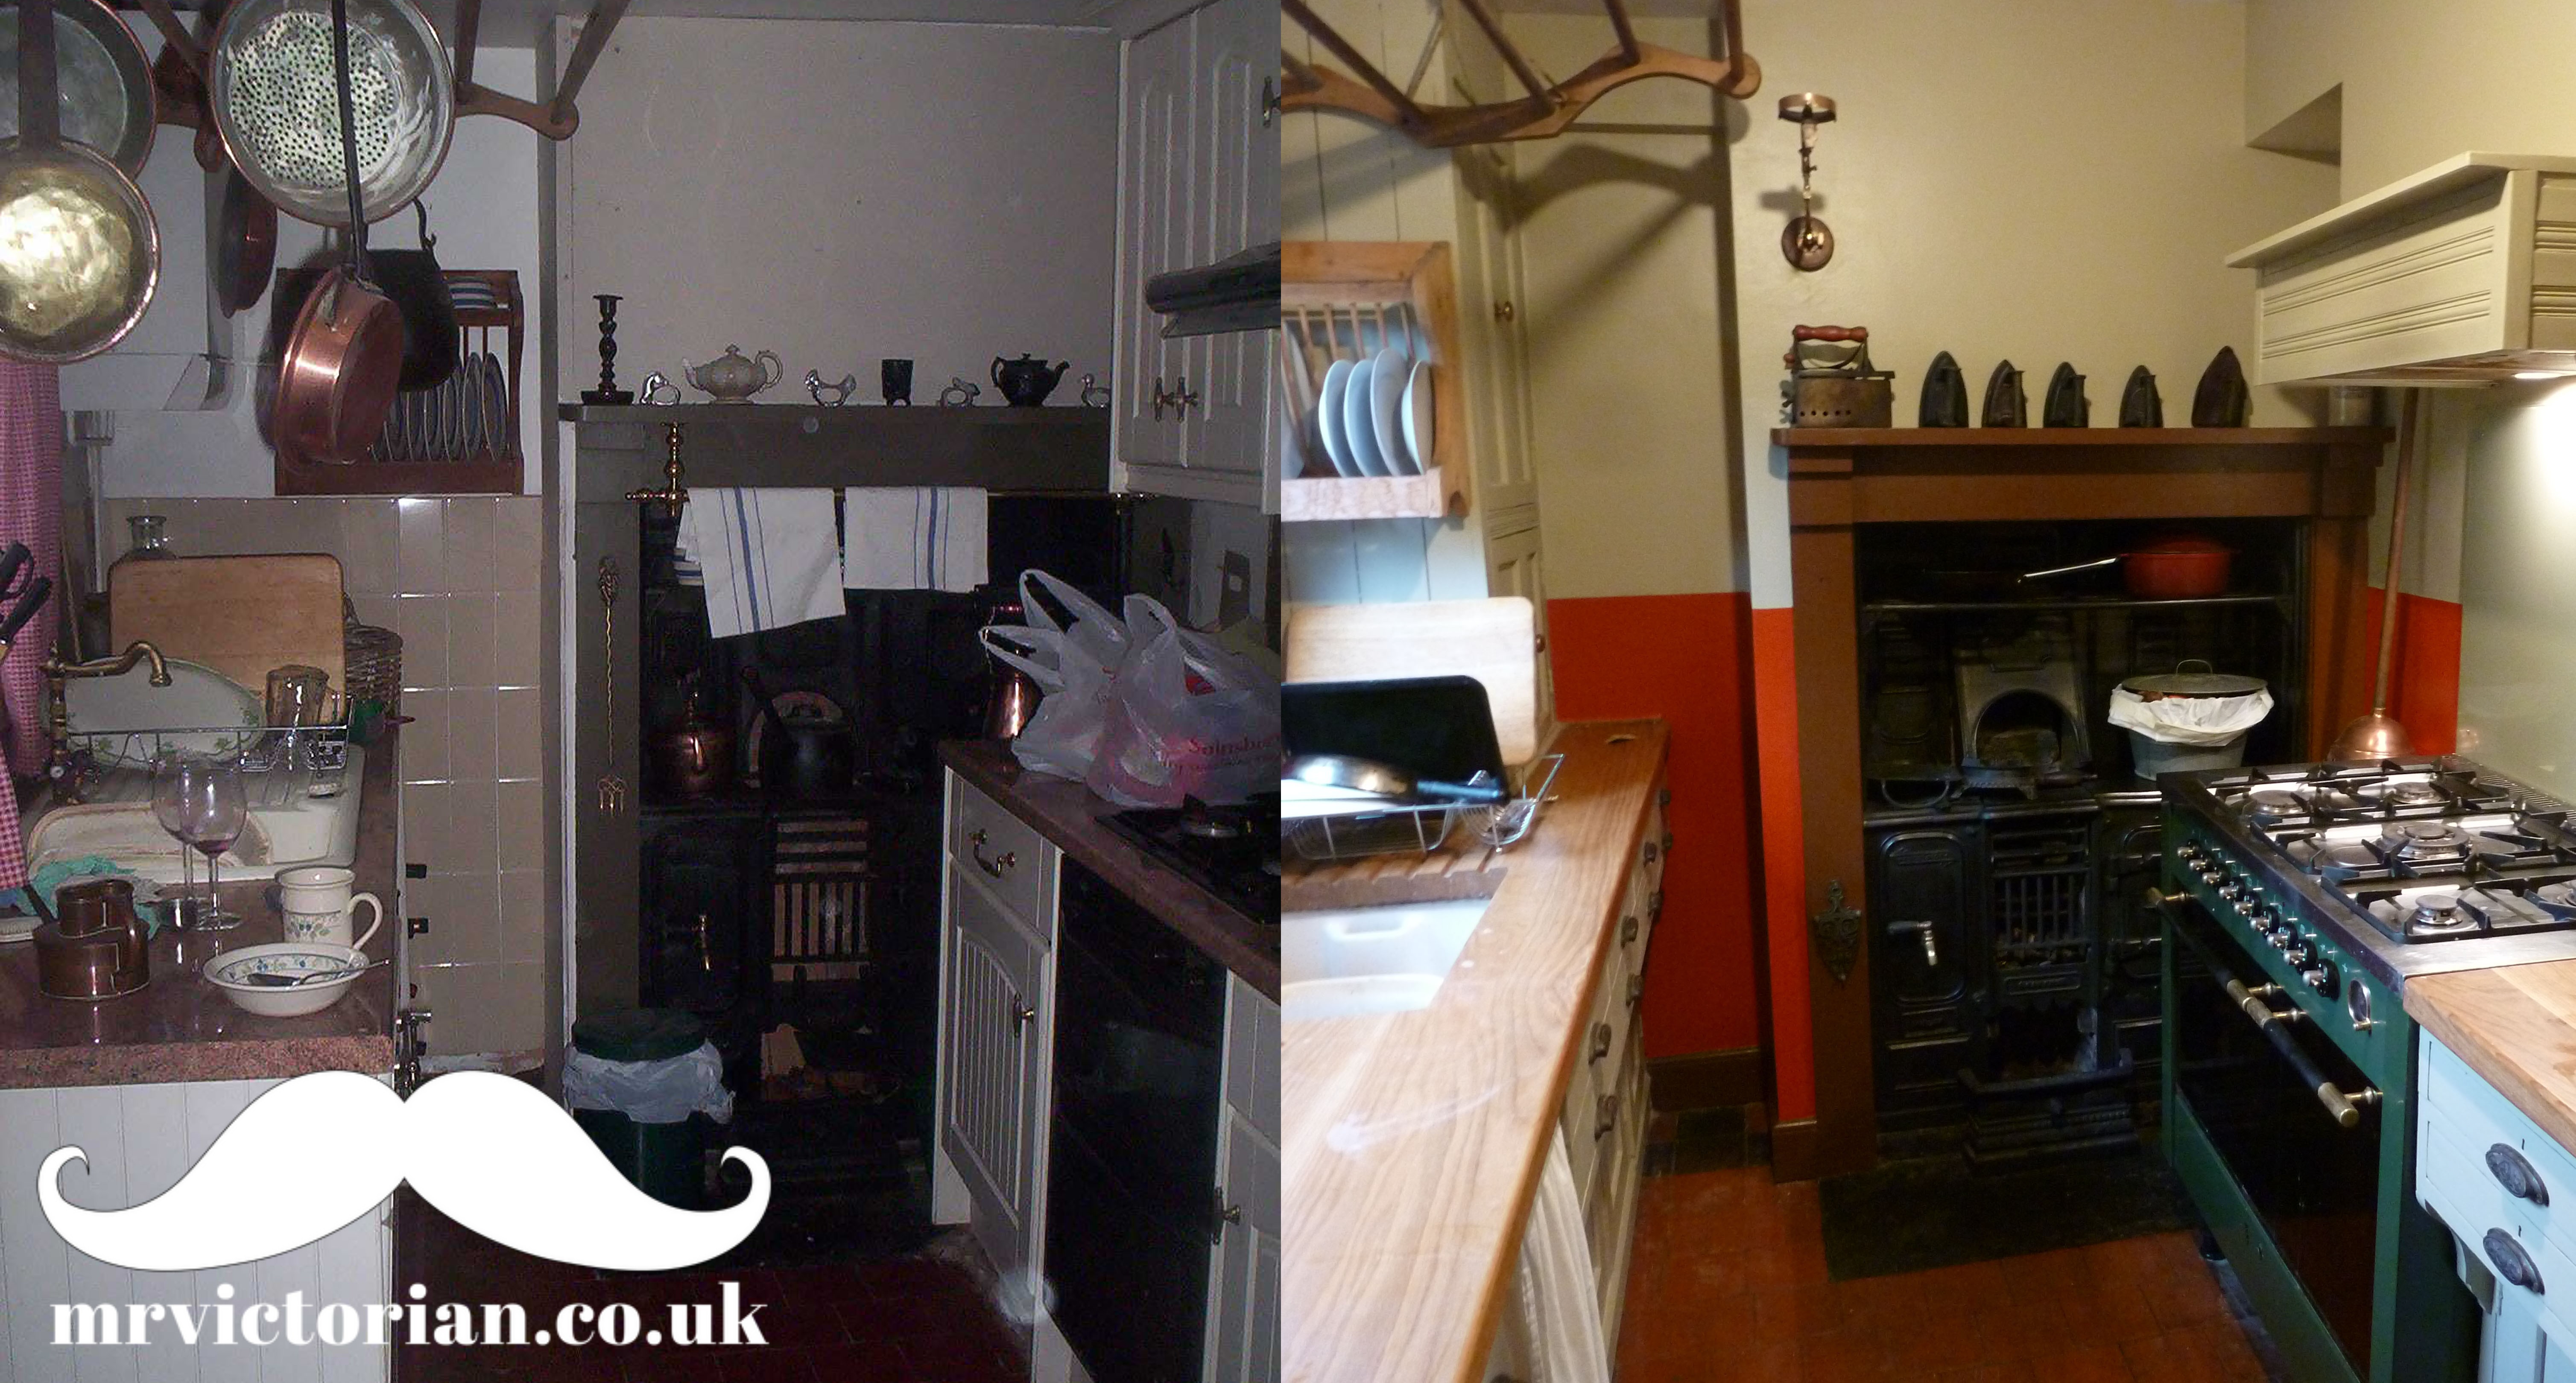 Victorian scullery before and after Mr Victorian kitchen